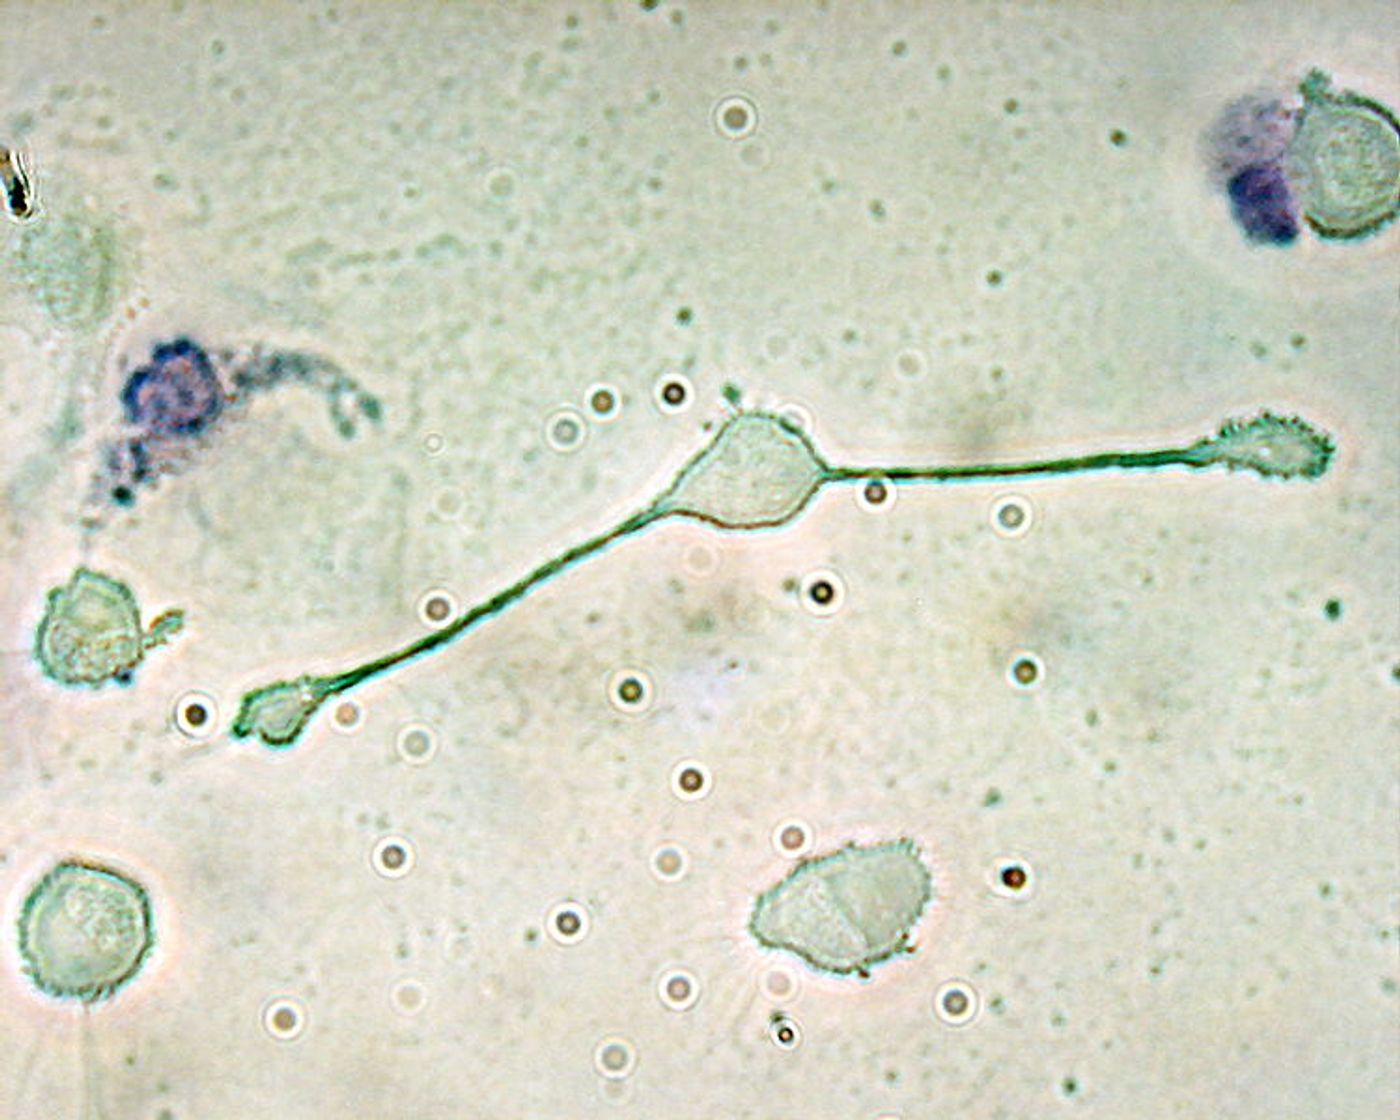 A macrophage of a mouse forming two processes to phagocytize two smaller particles, possibly pathogens. Credit: Wikimedia user magnaram